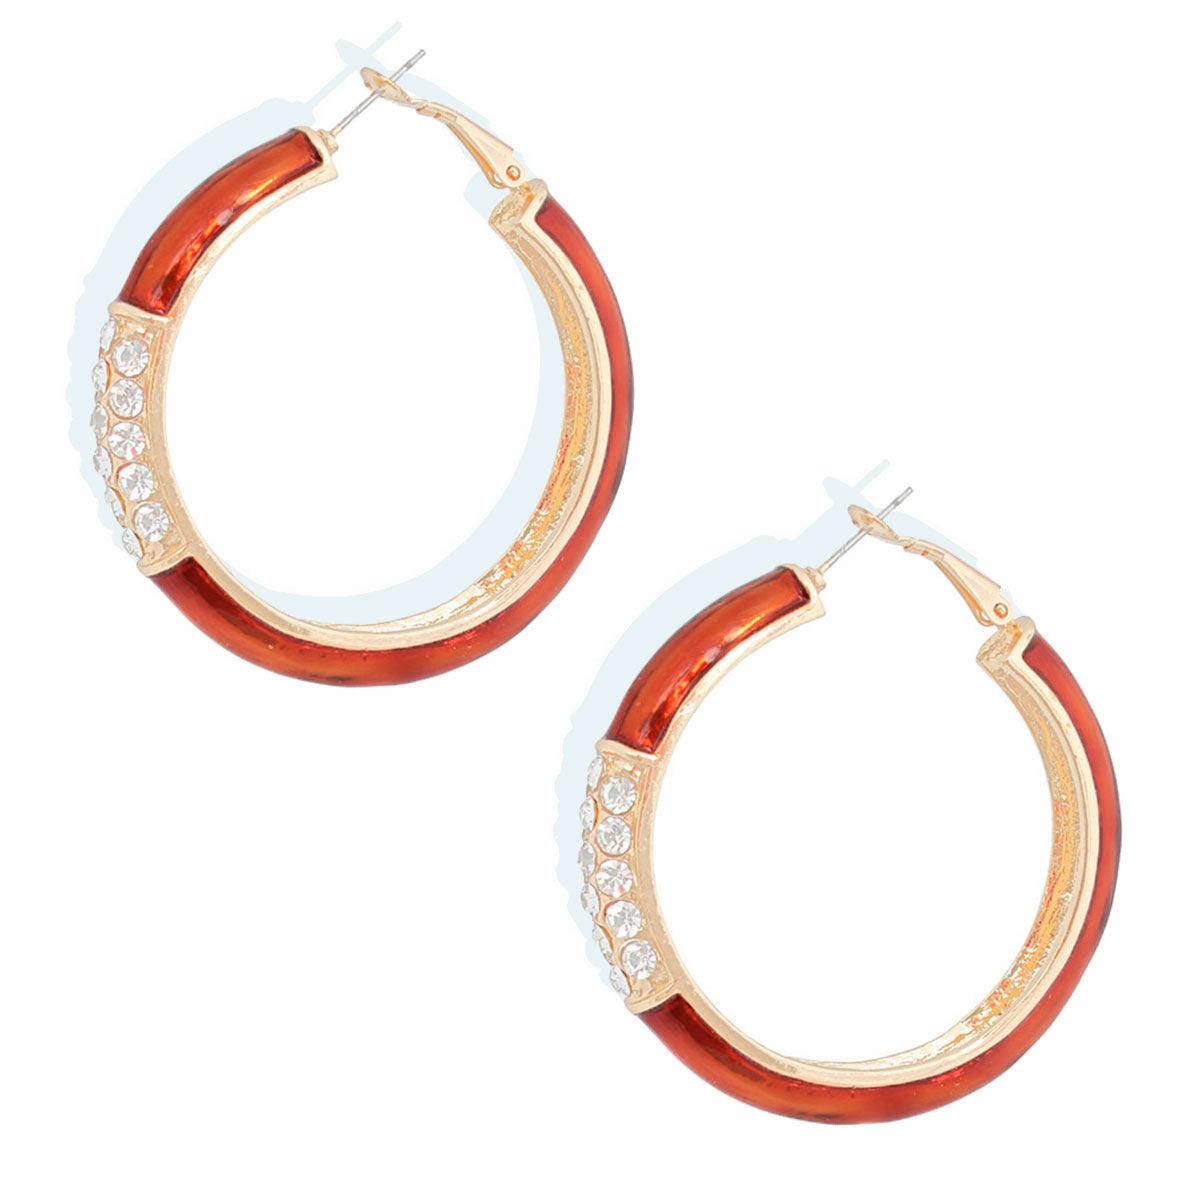 Burgundy and Gold Rhinestone Hoop Earrings: Your New Go-To Accessory